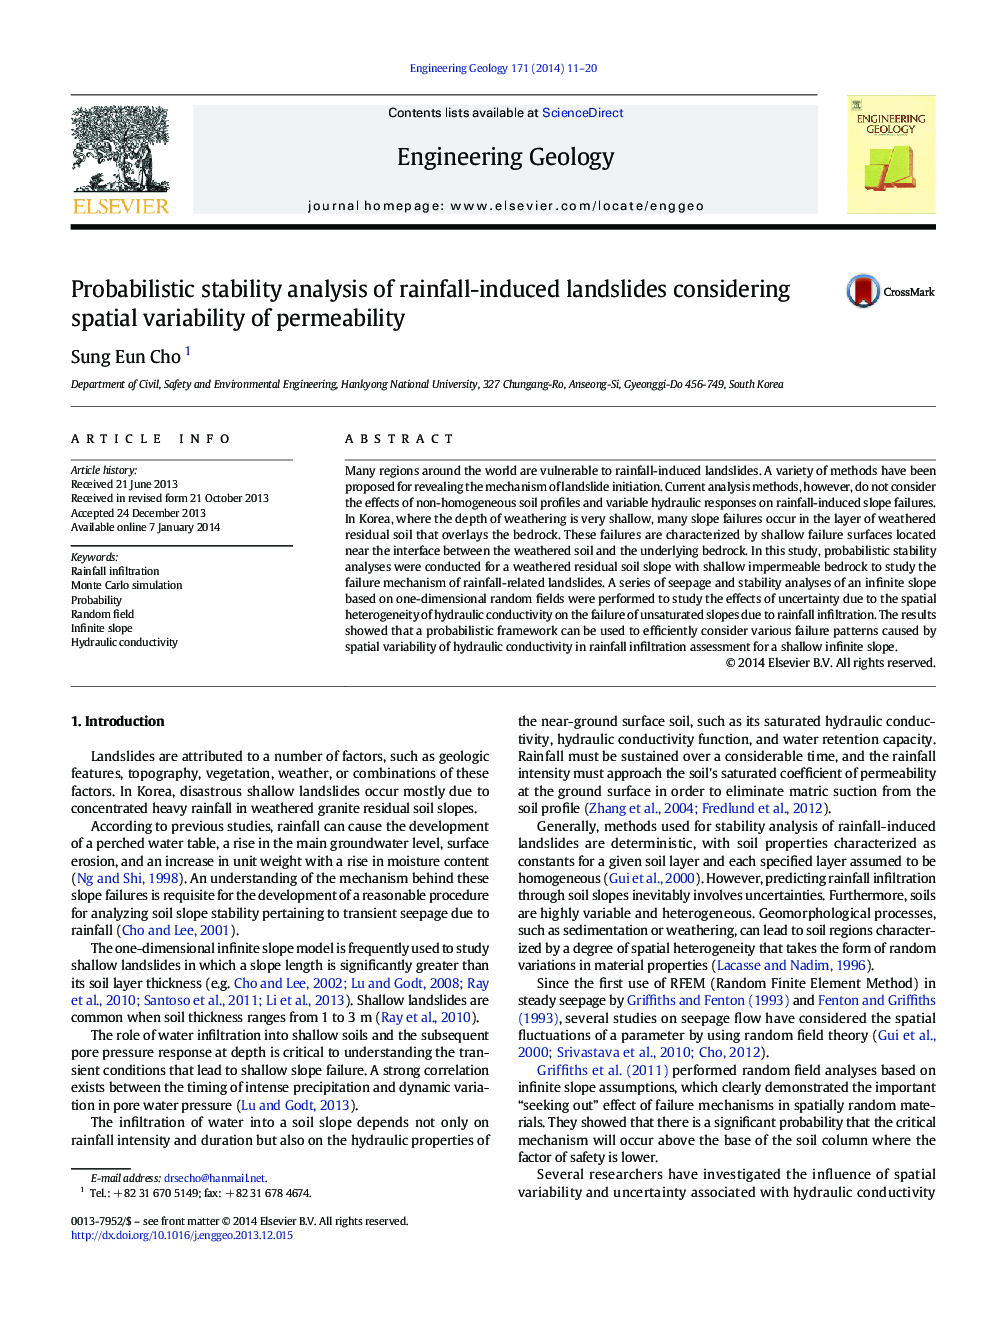 Probabilistic stability analysis of rainfall-induced landslides considering spatial variability of permeability